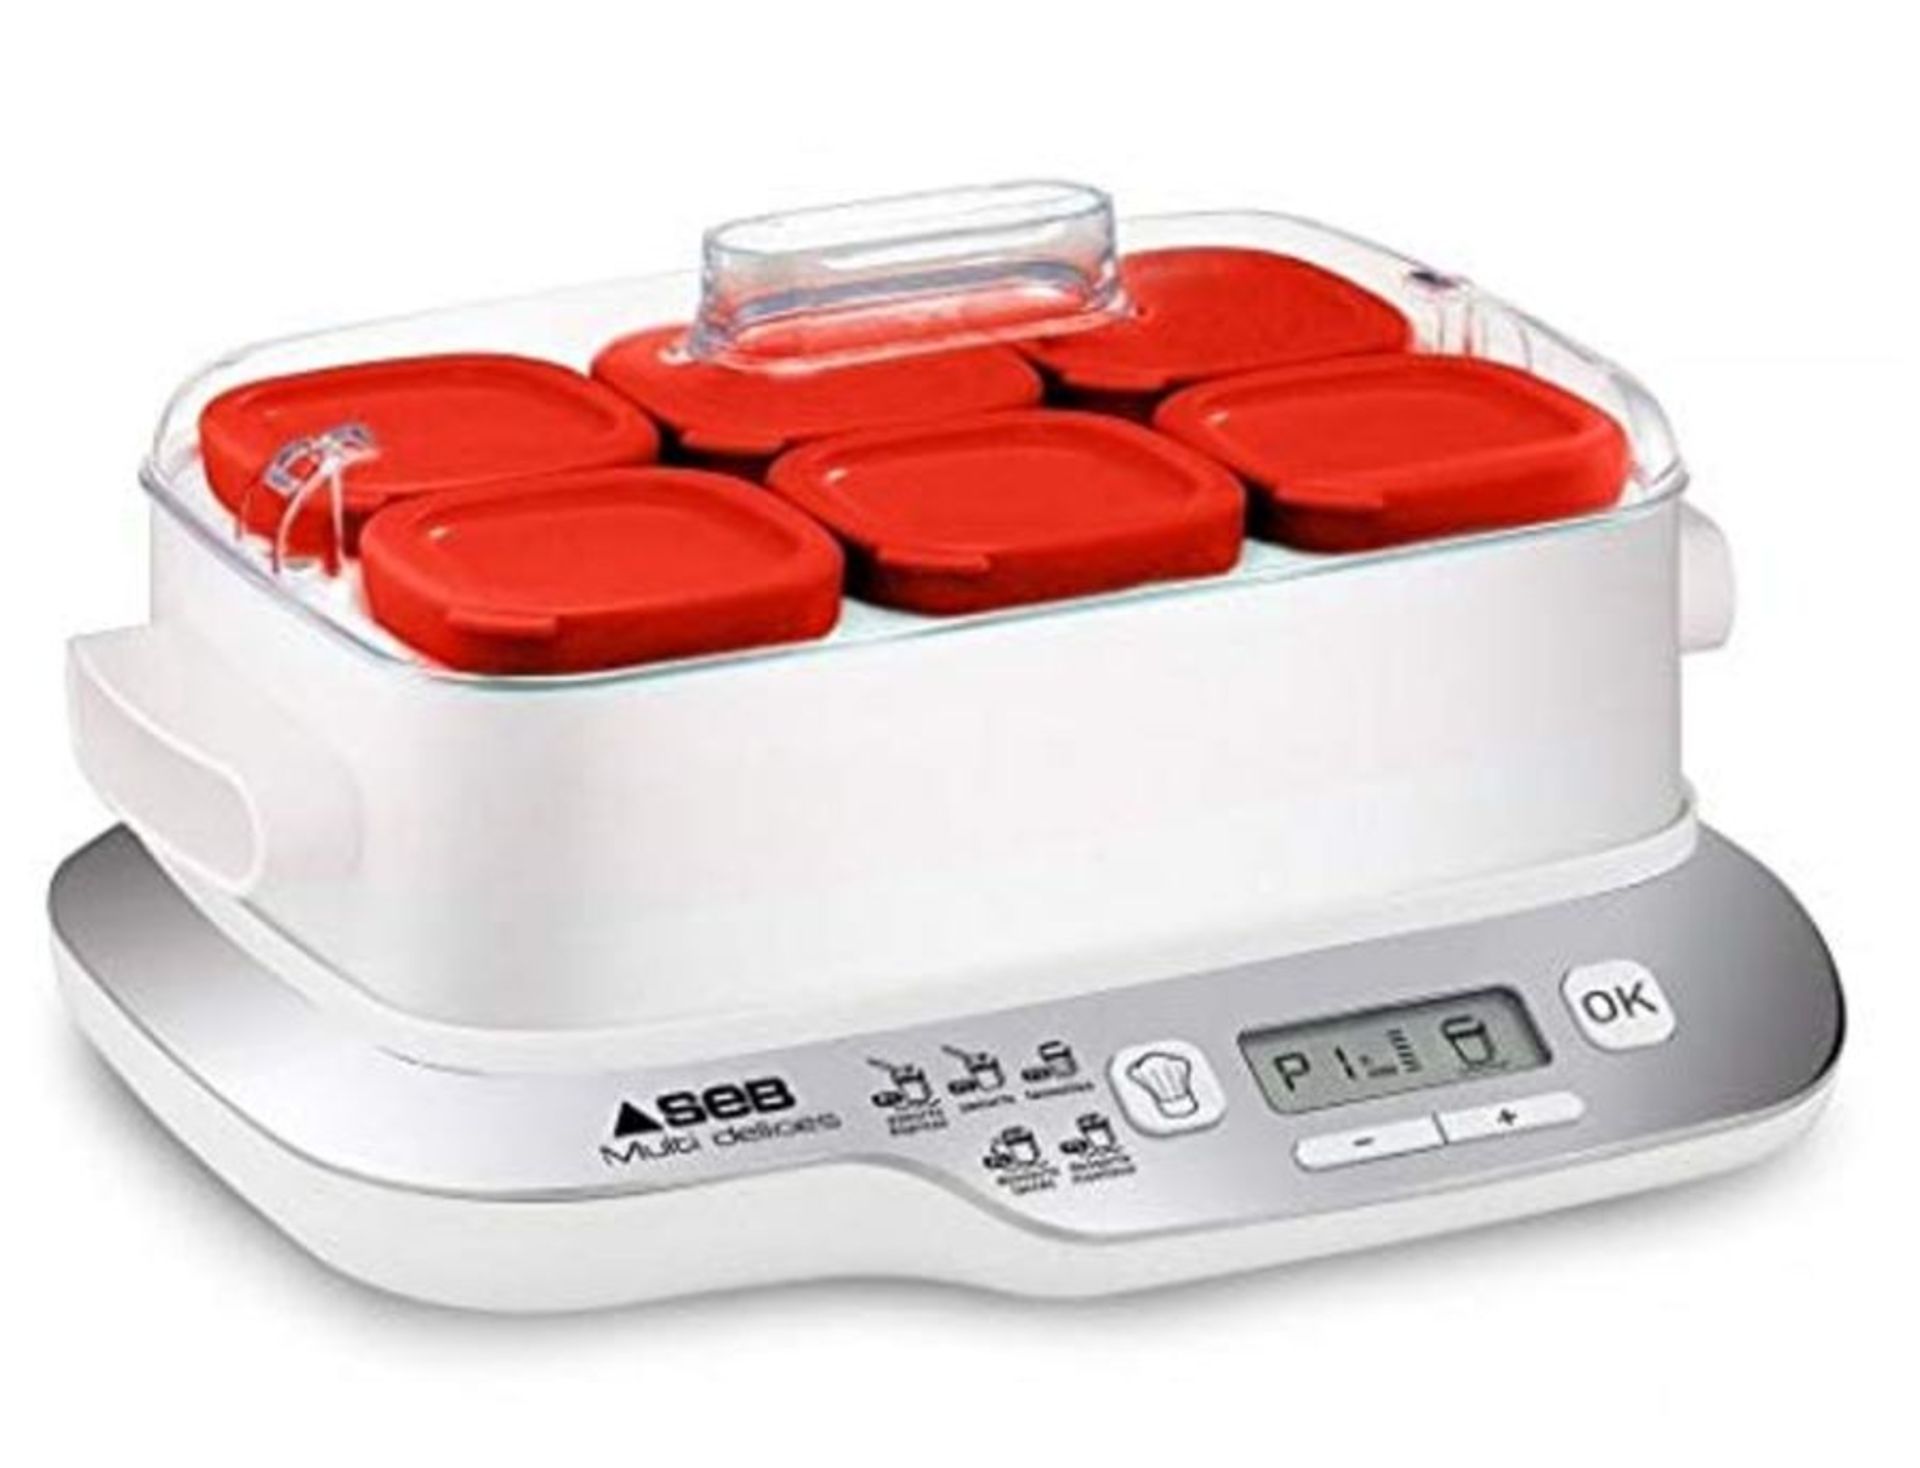 RRP £71.00 Seb Yoghurt Maker Multidelices Express Compact 6 Red Jars, Home Yoghurt, 5 Automatic P